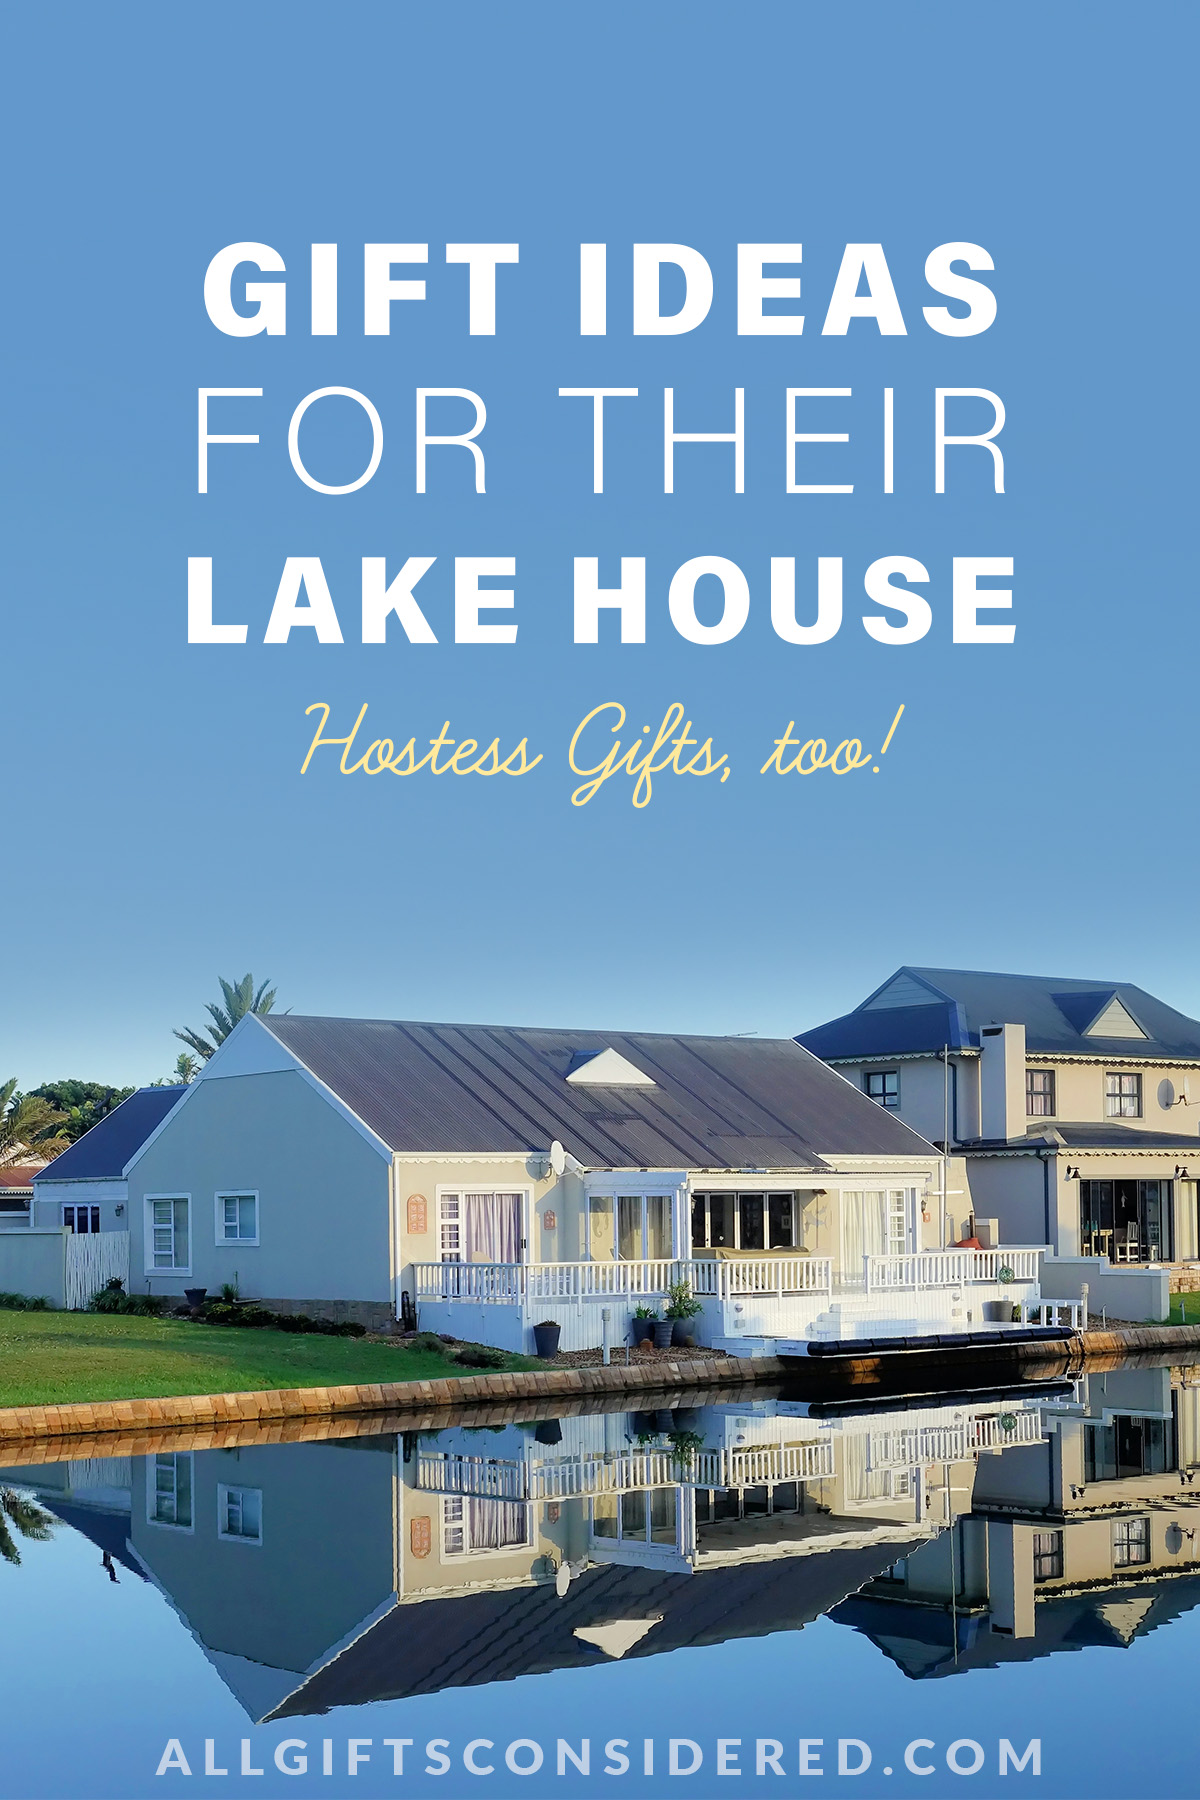 hostess gift ideas for lake house - feature image